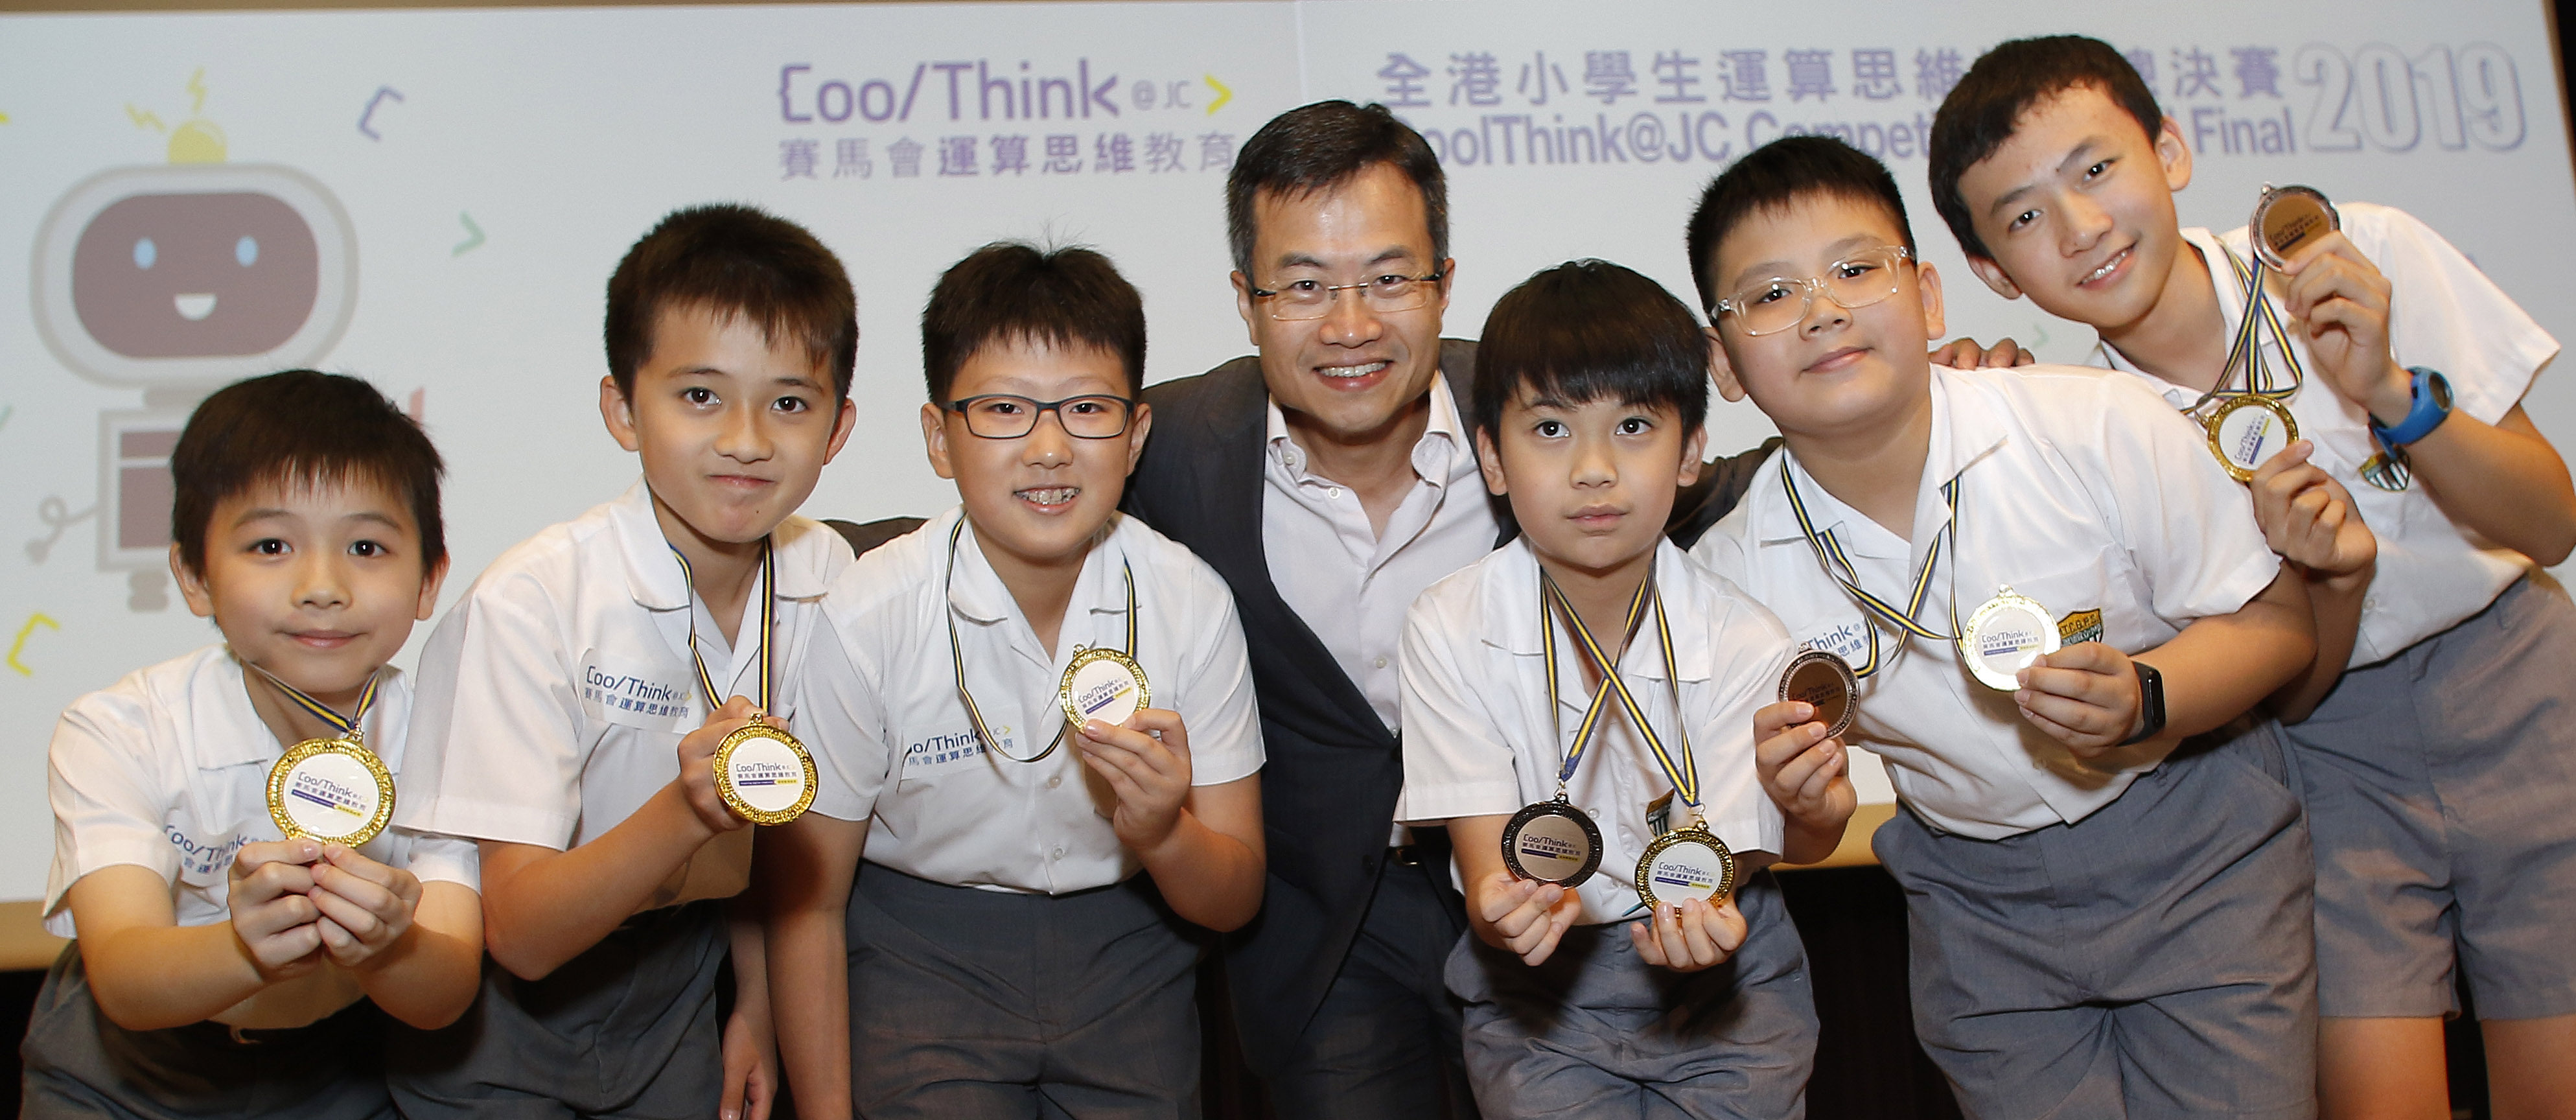 Leong Cheung, Executive Director of Charities & Community at The Hong Kong Jockey Club, presented awards to the winning team of the annual CoolThink@JC Competition. He says the programme helps prepare students for an I&T economy. This photograph was taken before the pandemic. Photo: HKJC